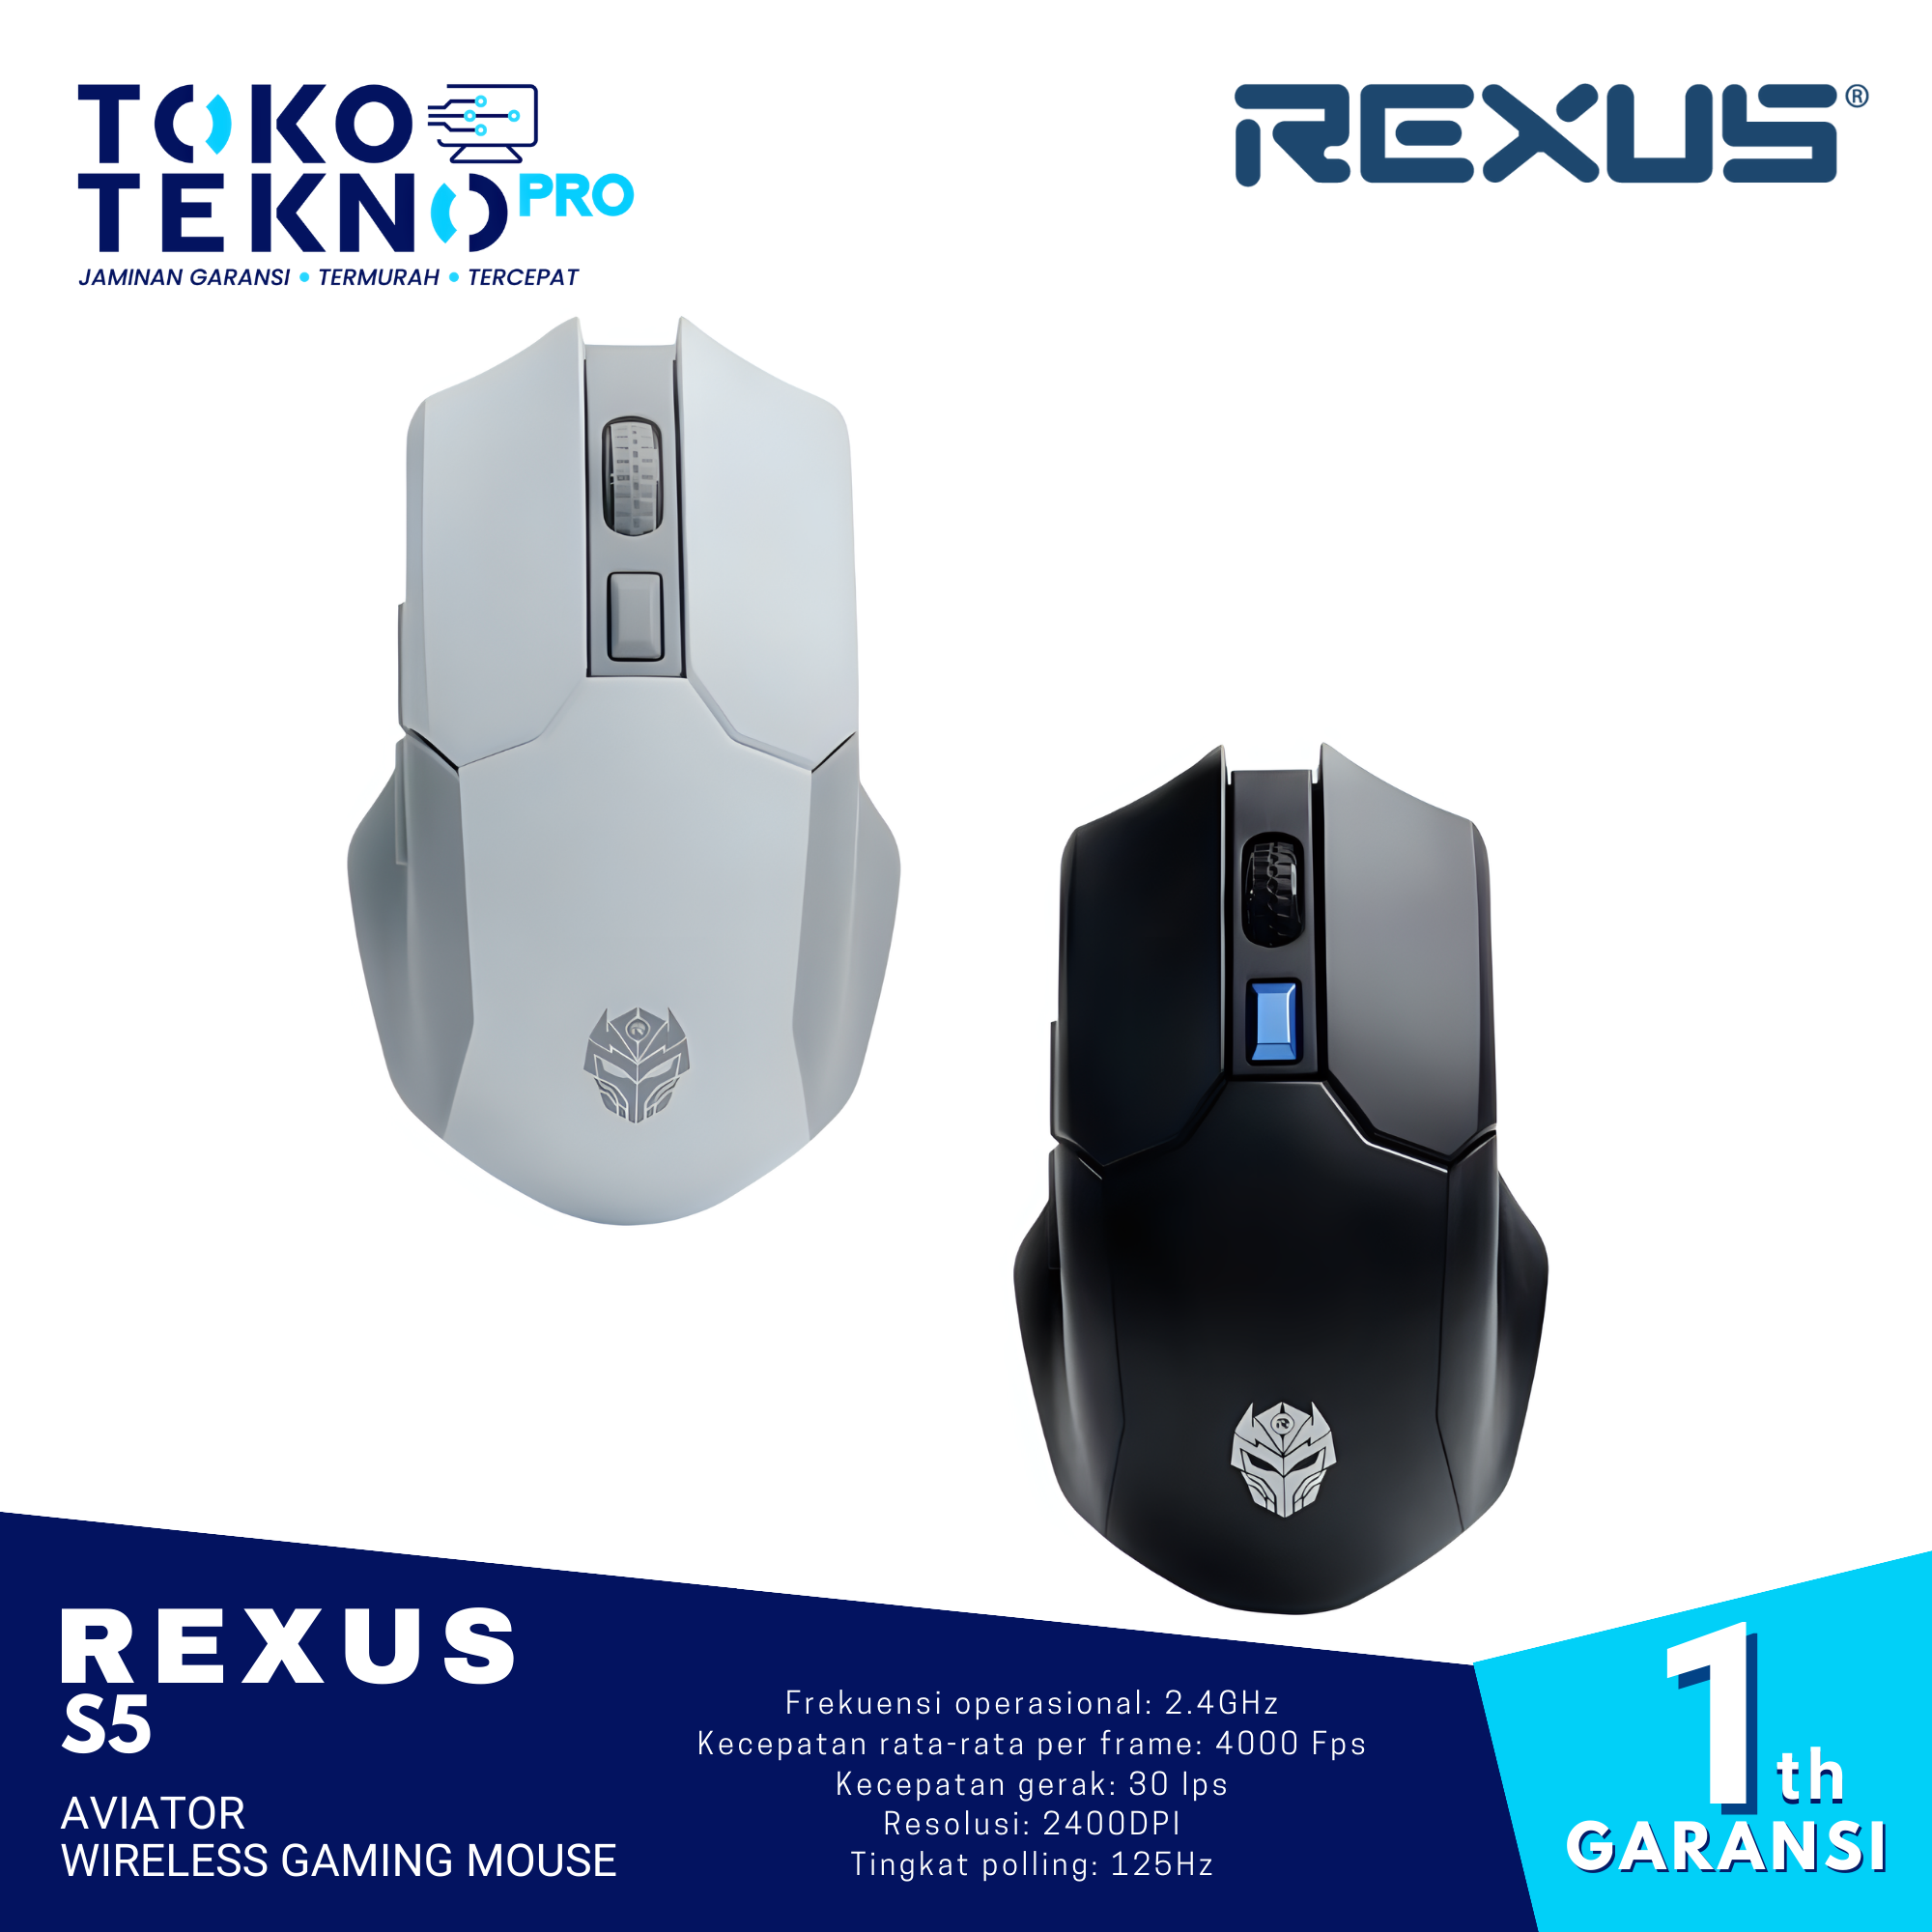 Rexus S5 Aviator Wireless Gaming Mouse